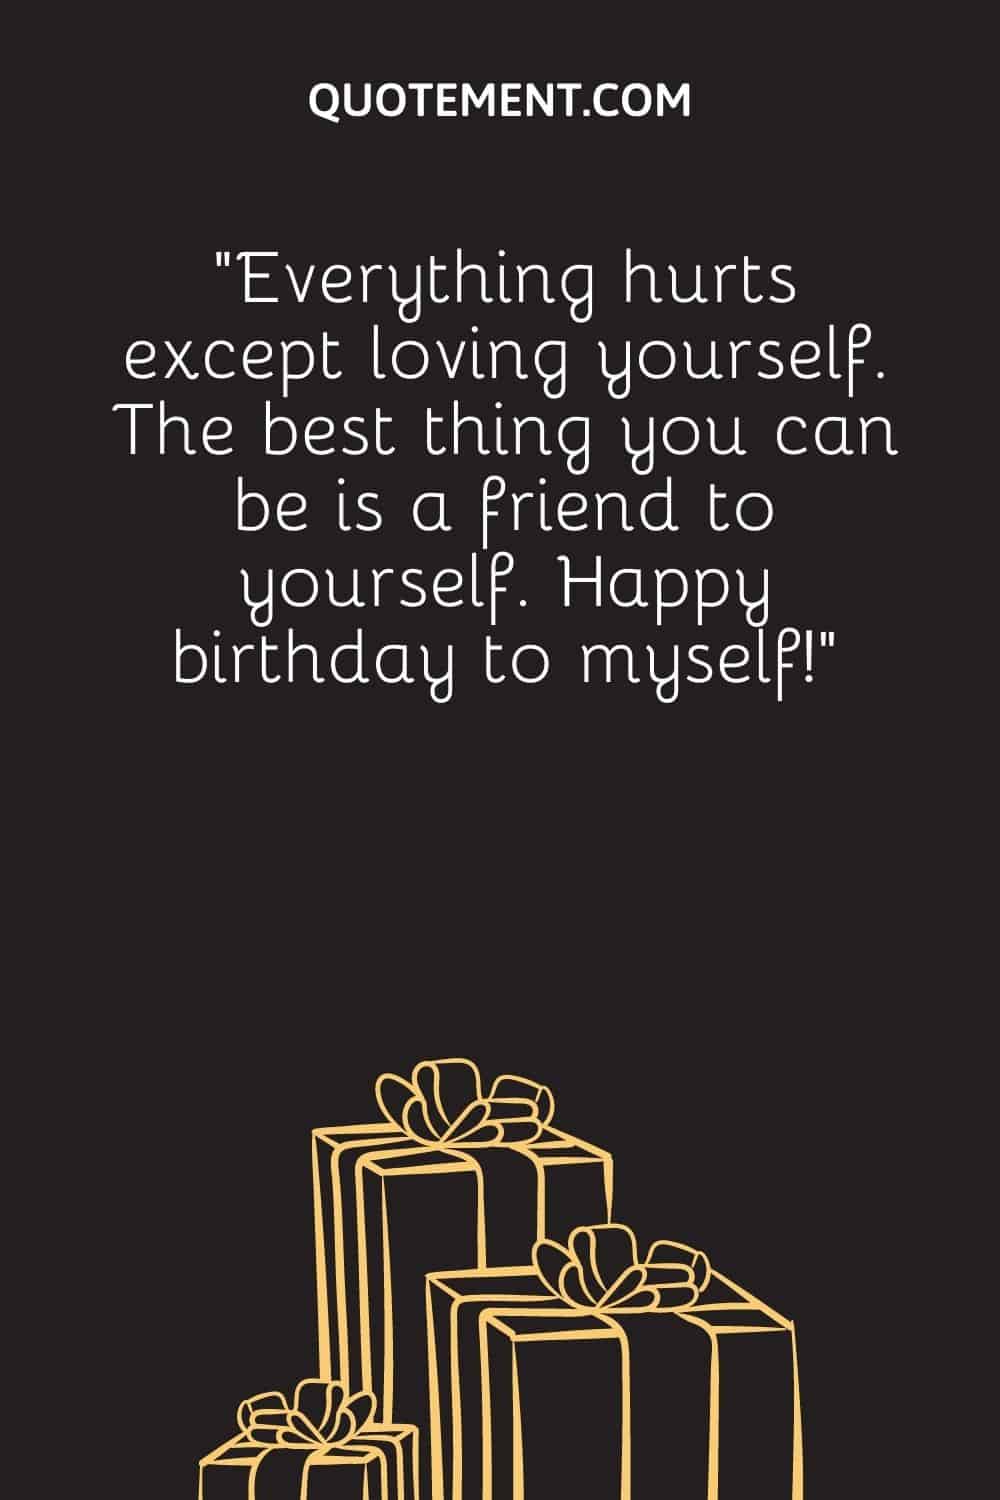 “Everything hurts except loving yourself. The best thing you can be is a friend to yourself. Happy birthday to myself!”